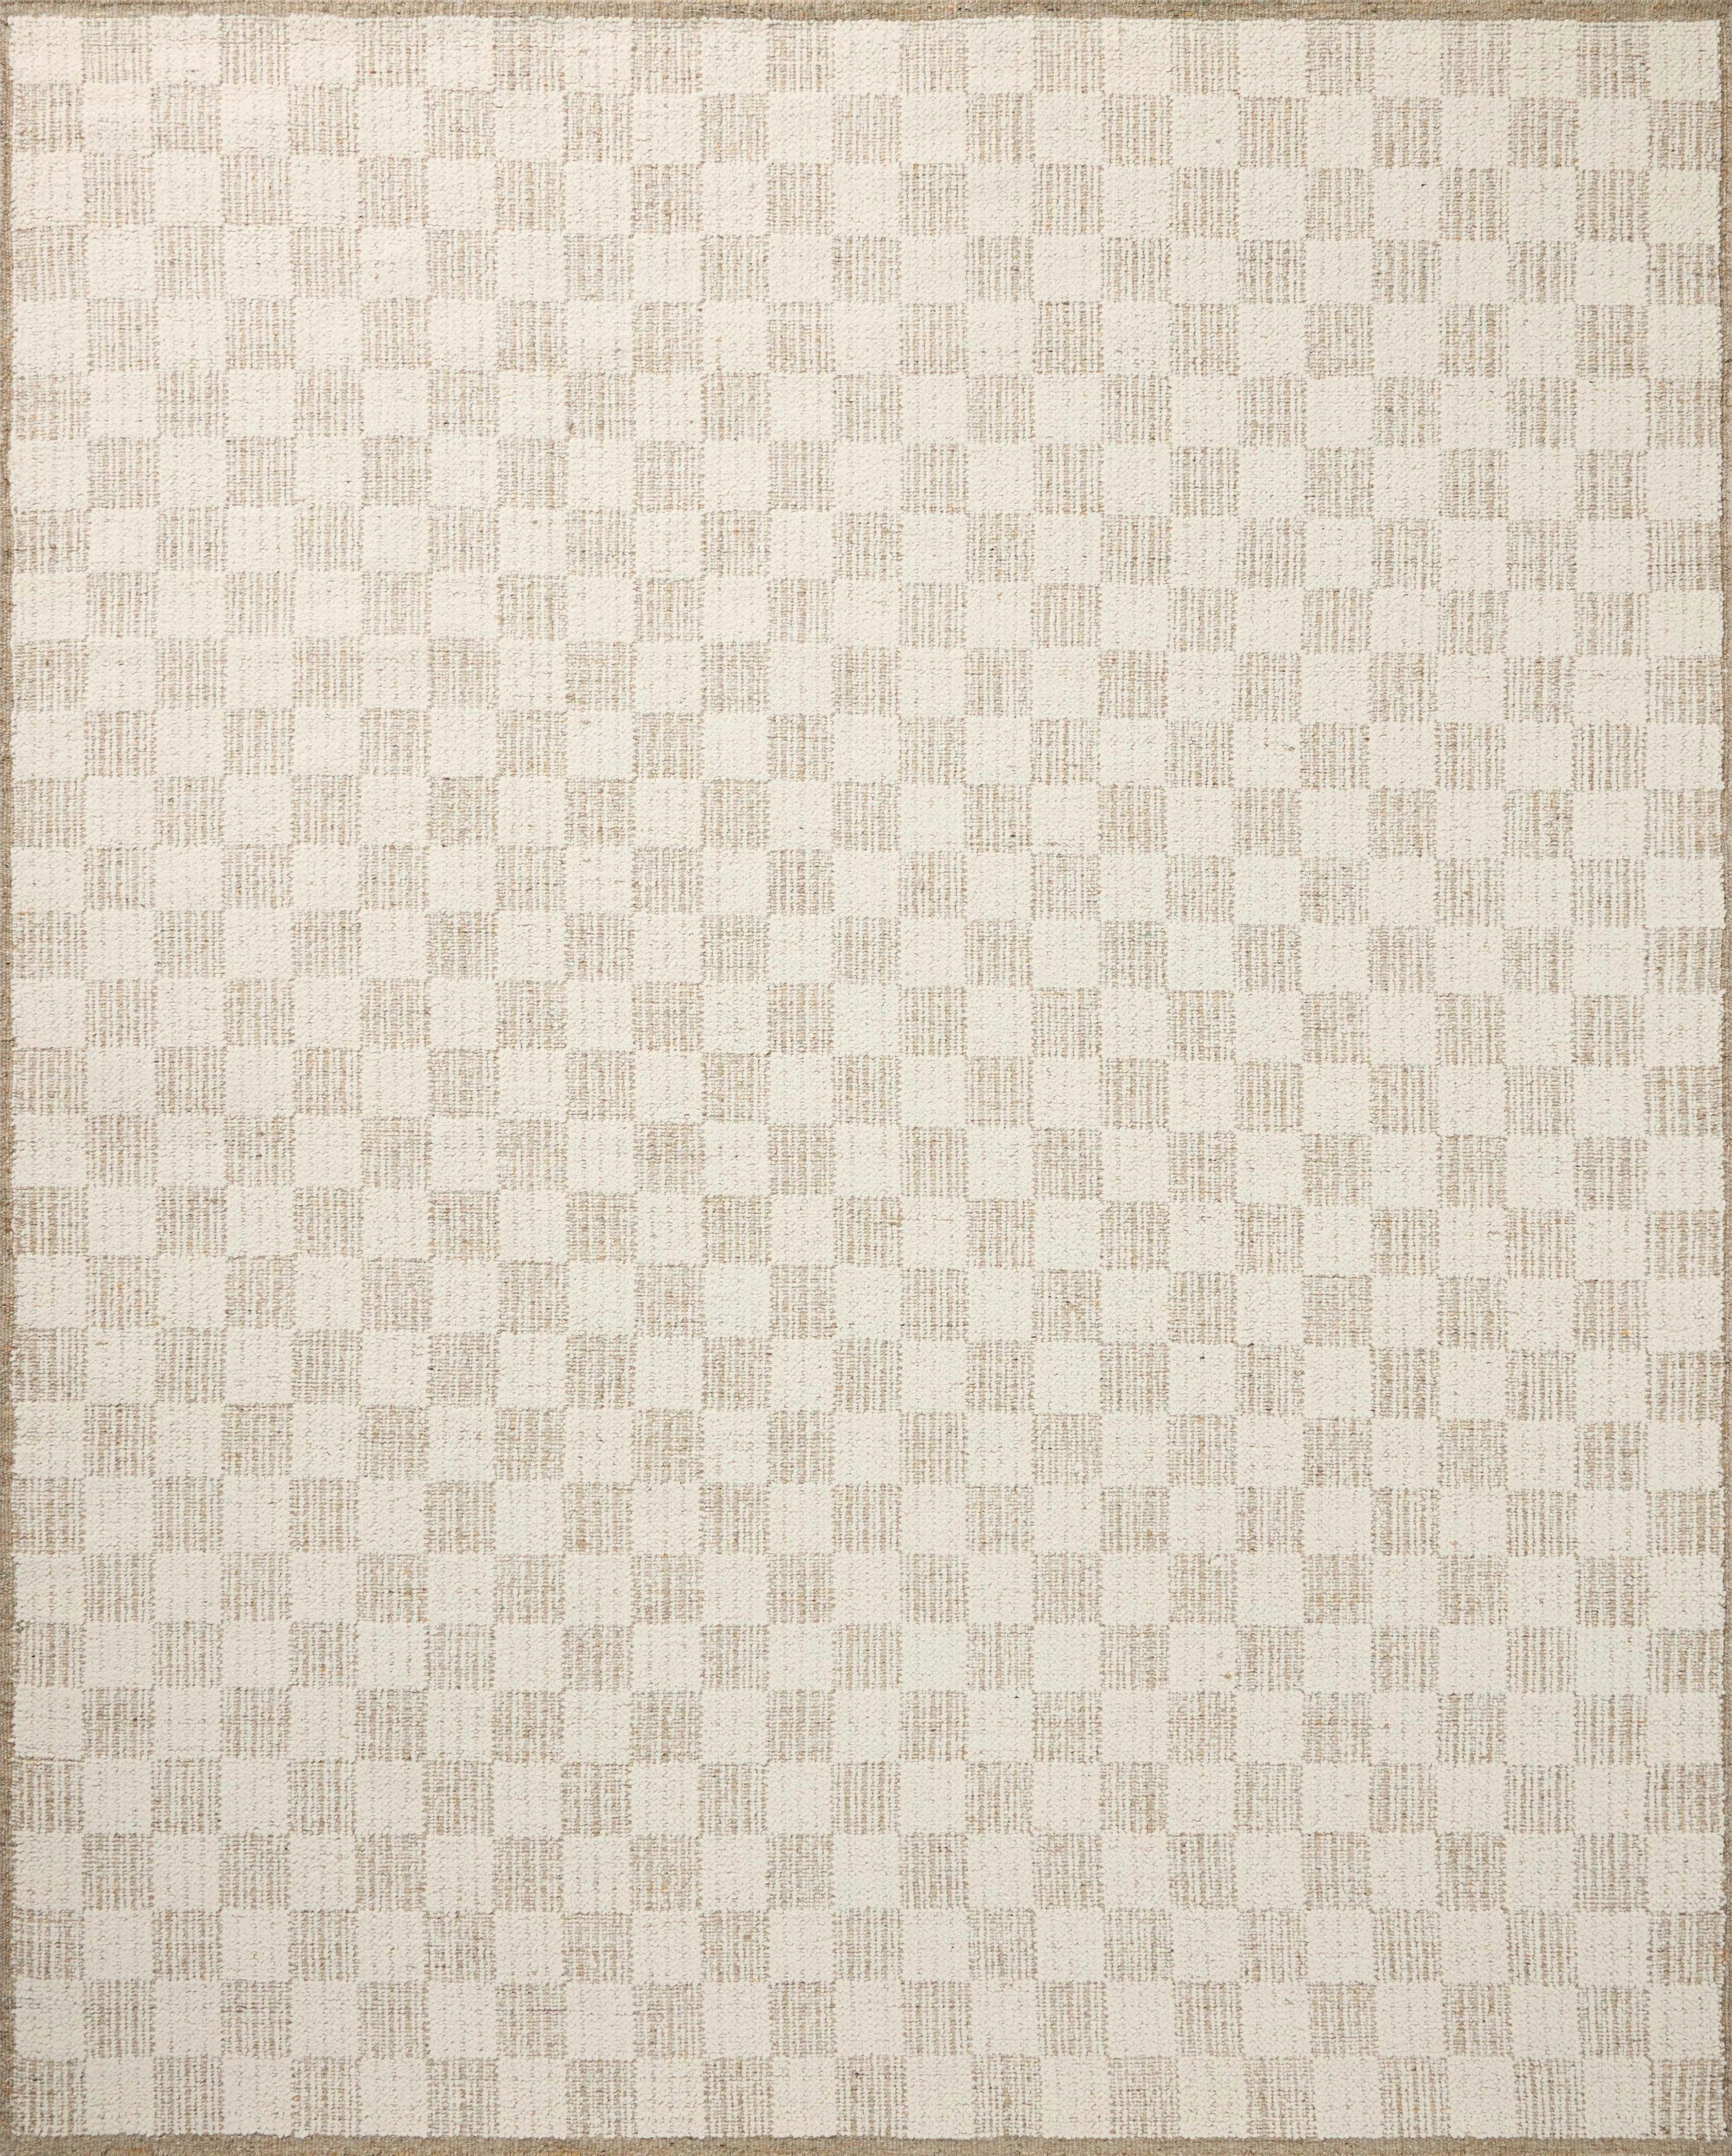 The Knox Ivory / Khaki Rug by Brigette Romanek x Loloi is a handwoven area rug with a contemporary checkerboard pattern and a texture reminiscent of a luxurious knit sweater. Made of a blend of wool and cotton that plays with scale and texture, Knox is imbued with cozy luxury that can anchor any room. Amethyst Home provides interior design, new home construction design consulting, vintage area rugs, and lighting in the Portland metro area.